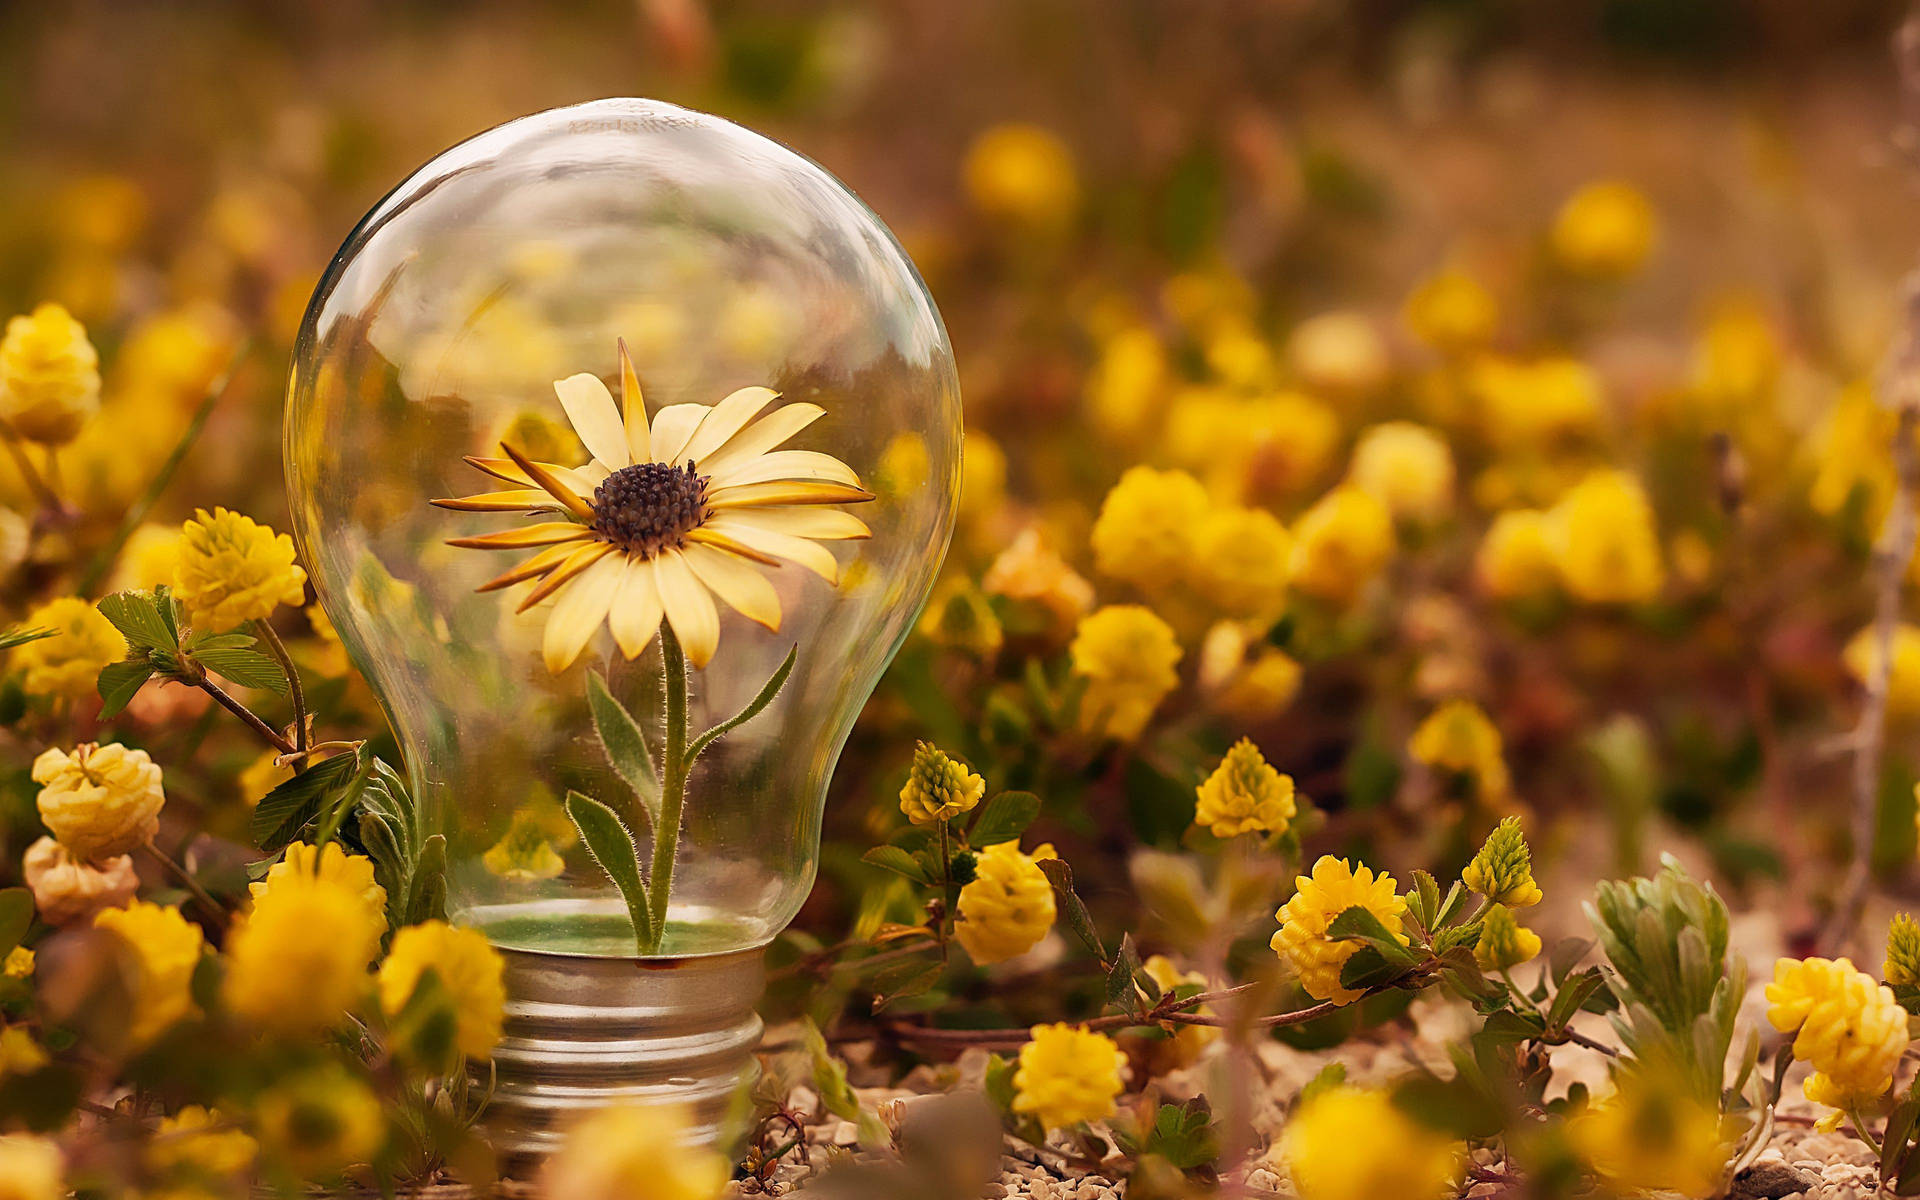 Light Bulb With Sunflowers Background